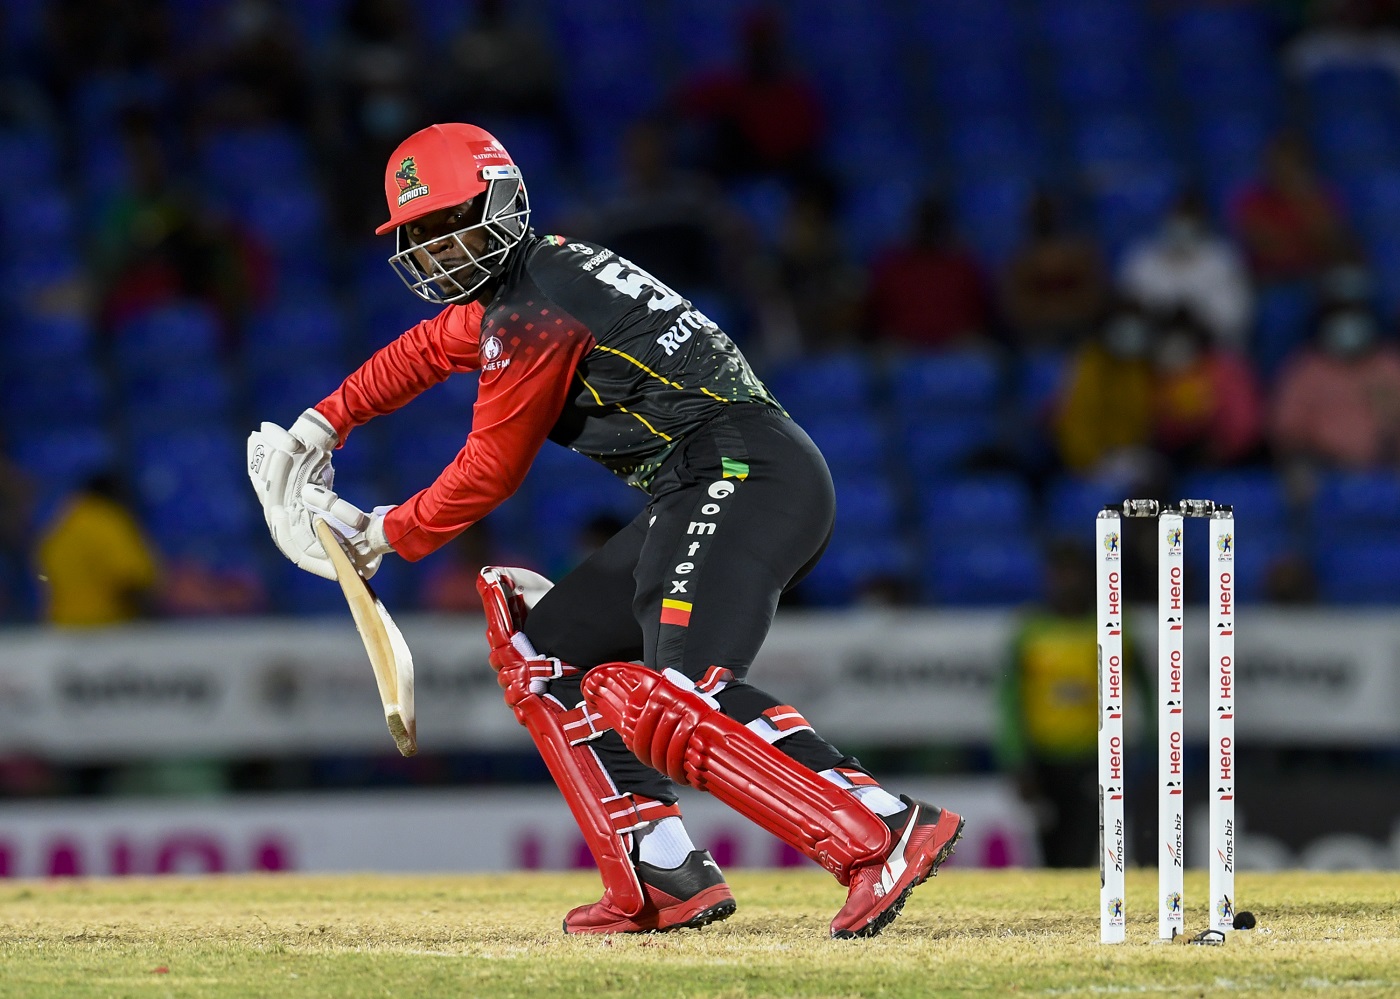 CPL 2021 Live SKN vs GUY- How To Watch CPL 2021 2nd Semi-Final Live In Your Country?